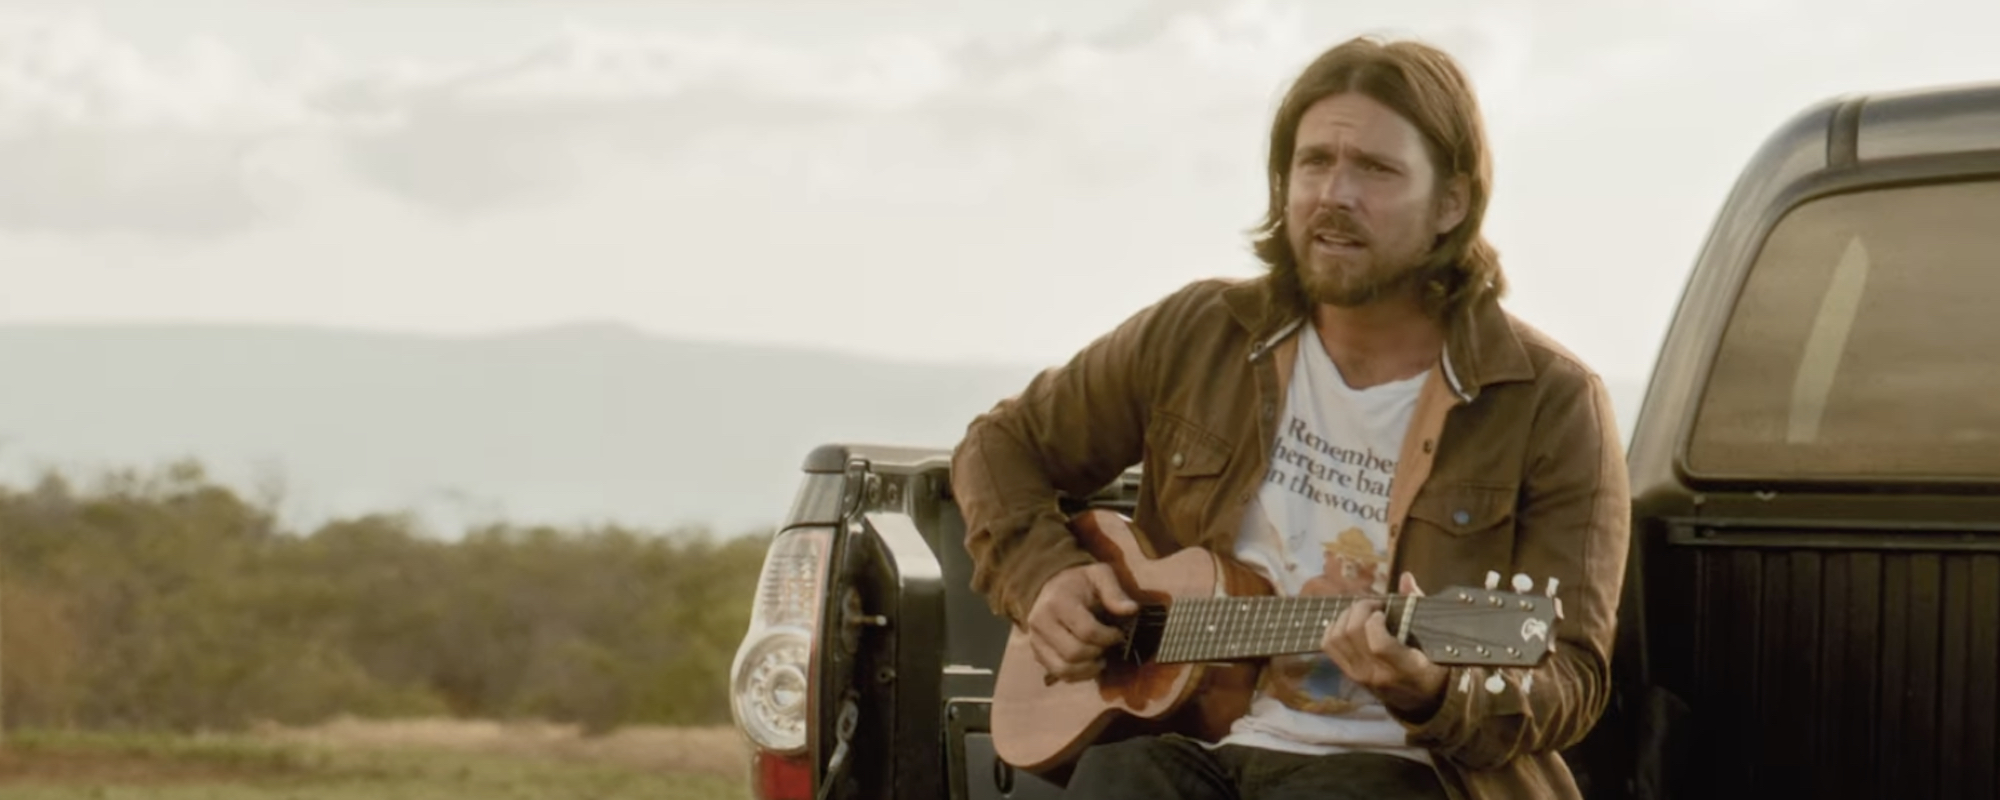 Watch: Lukas Nelson Celebrates the Island of Maui In Scenic New Video for “The View”